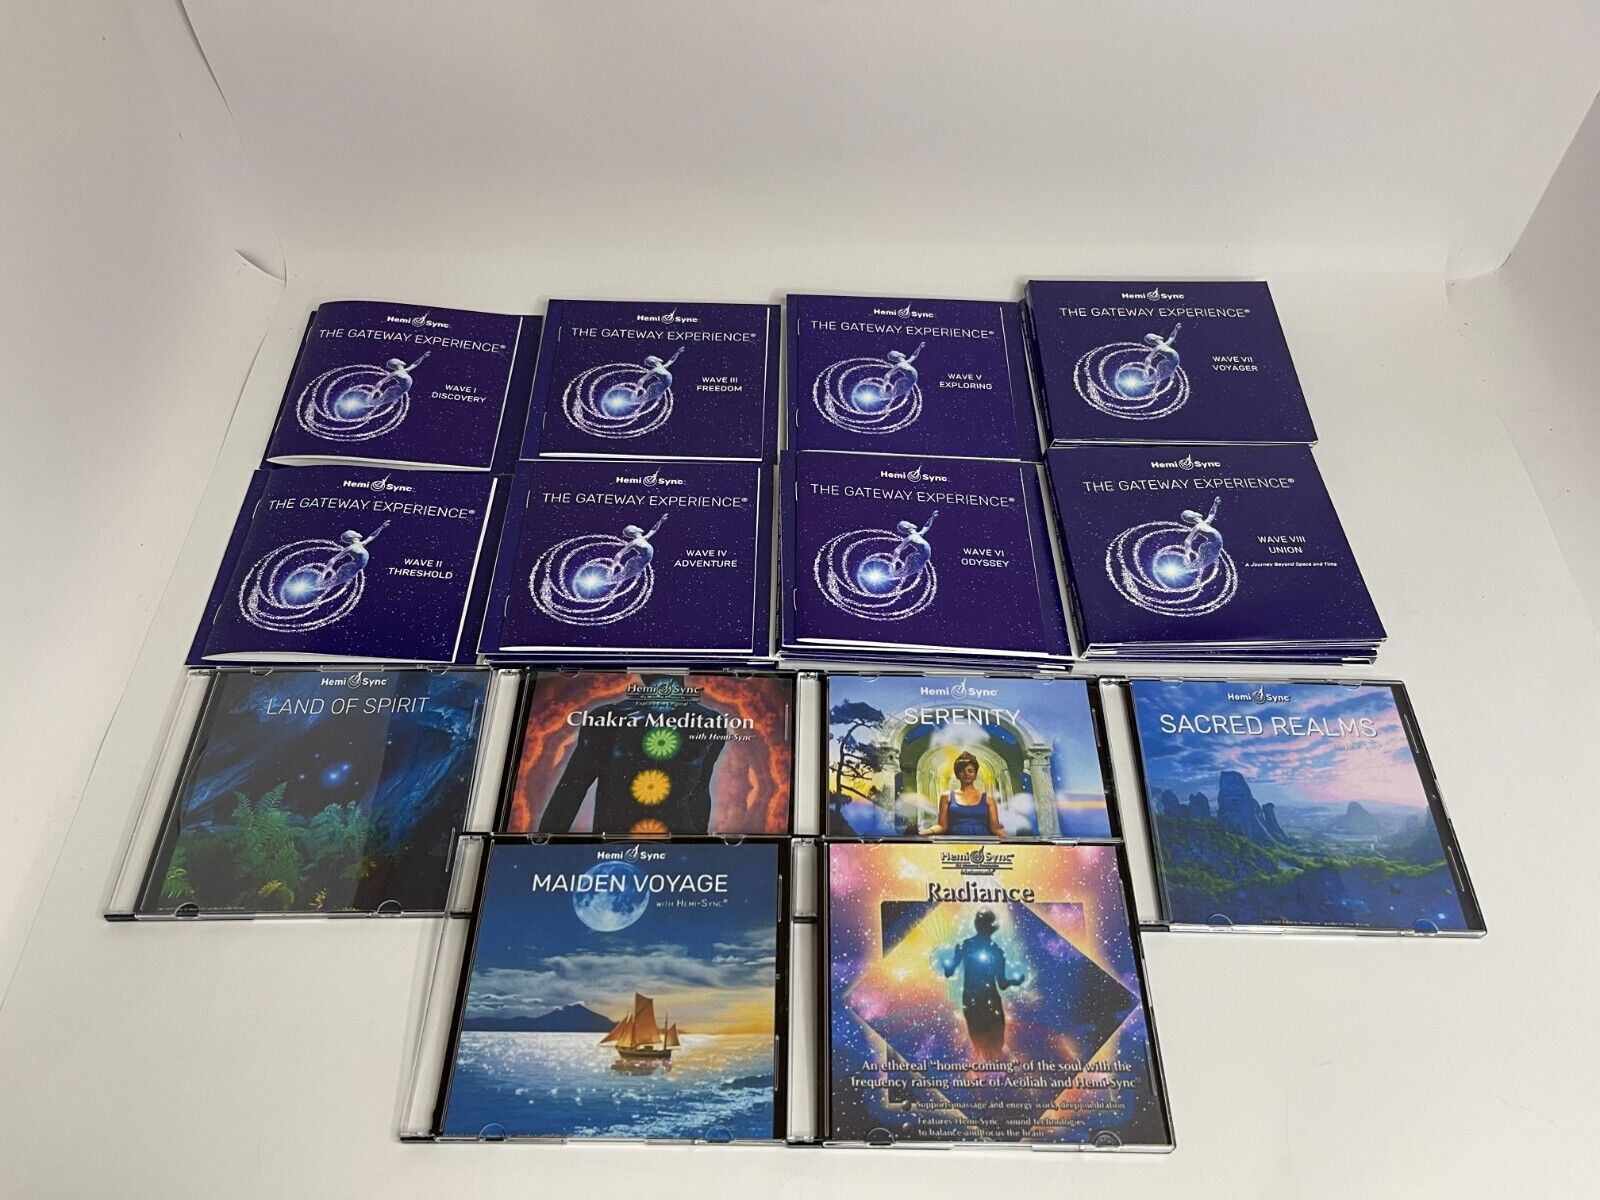 Hemi-Sync The Gateway Experience 25 CD 8 Volumes Booklets Included 6 Bonus Sets